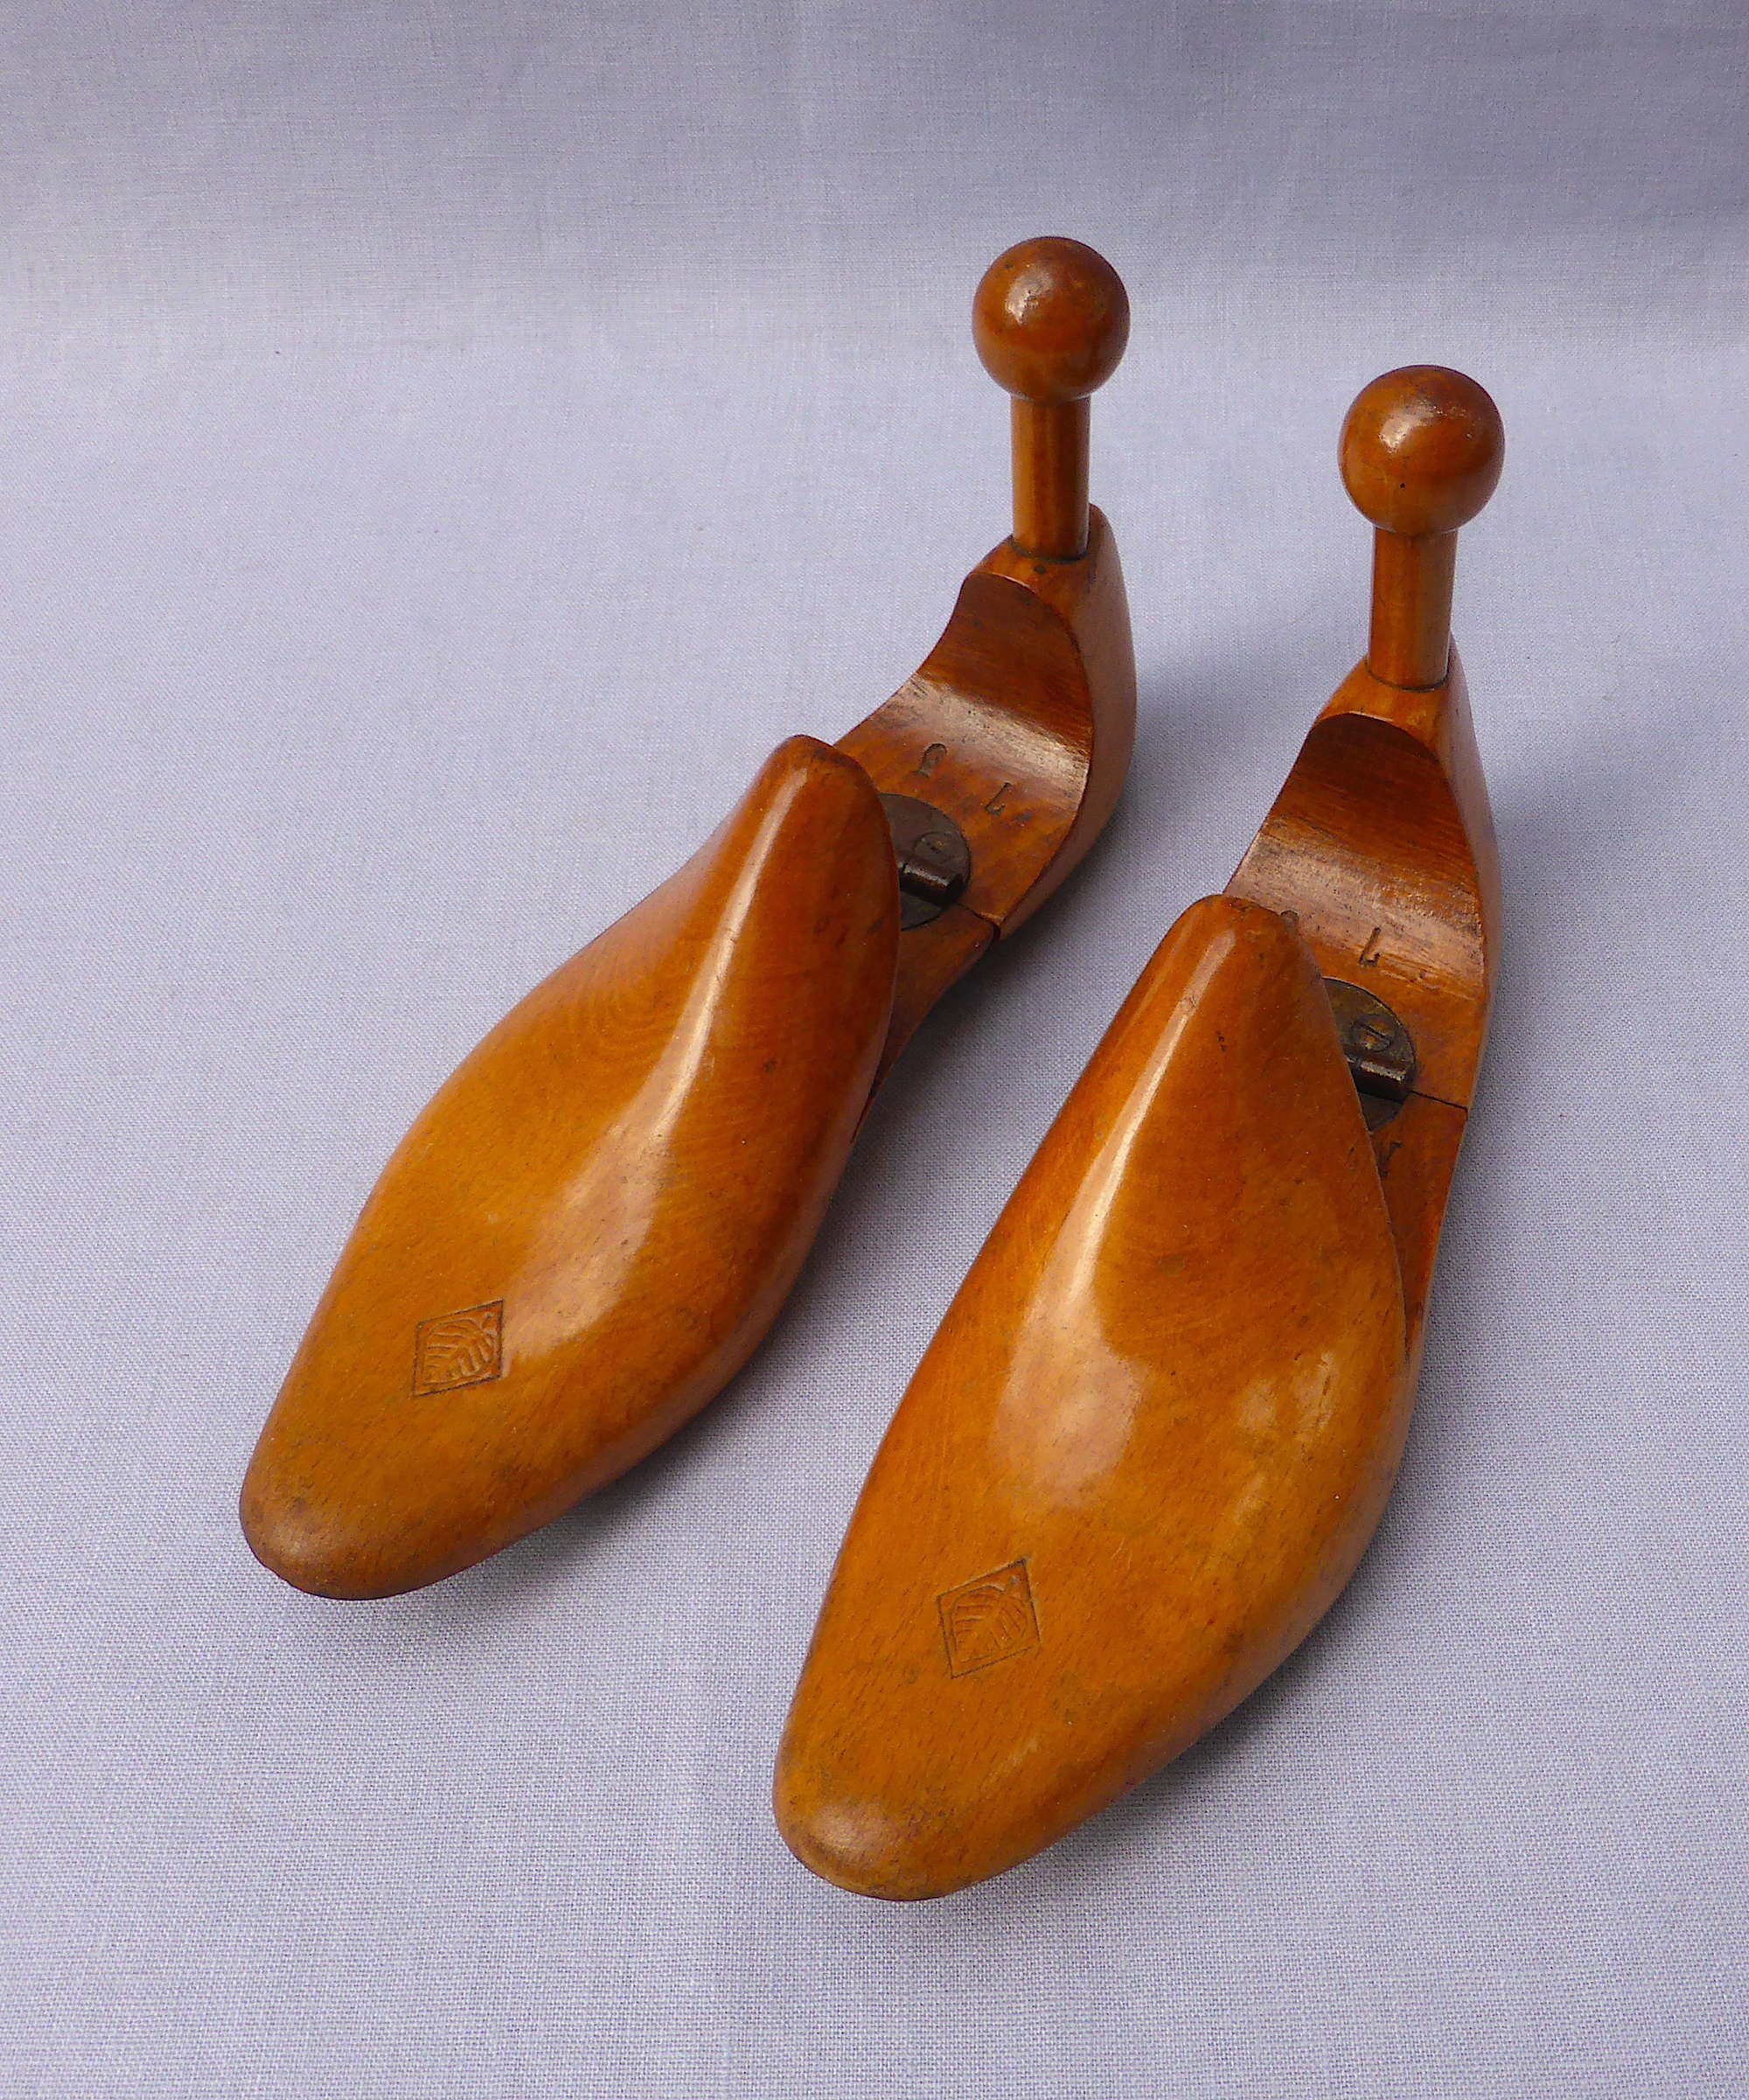 Pair of Early 20th Century Wooden Shoe Lasts